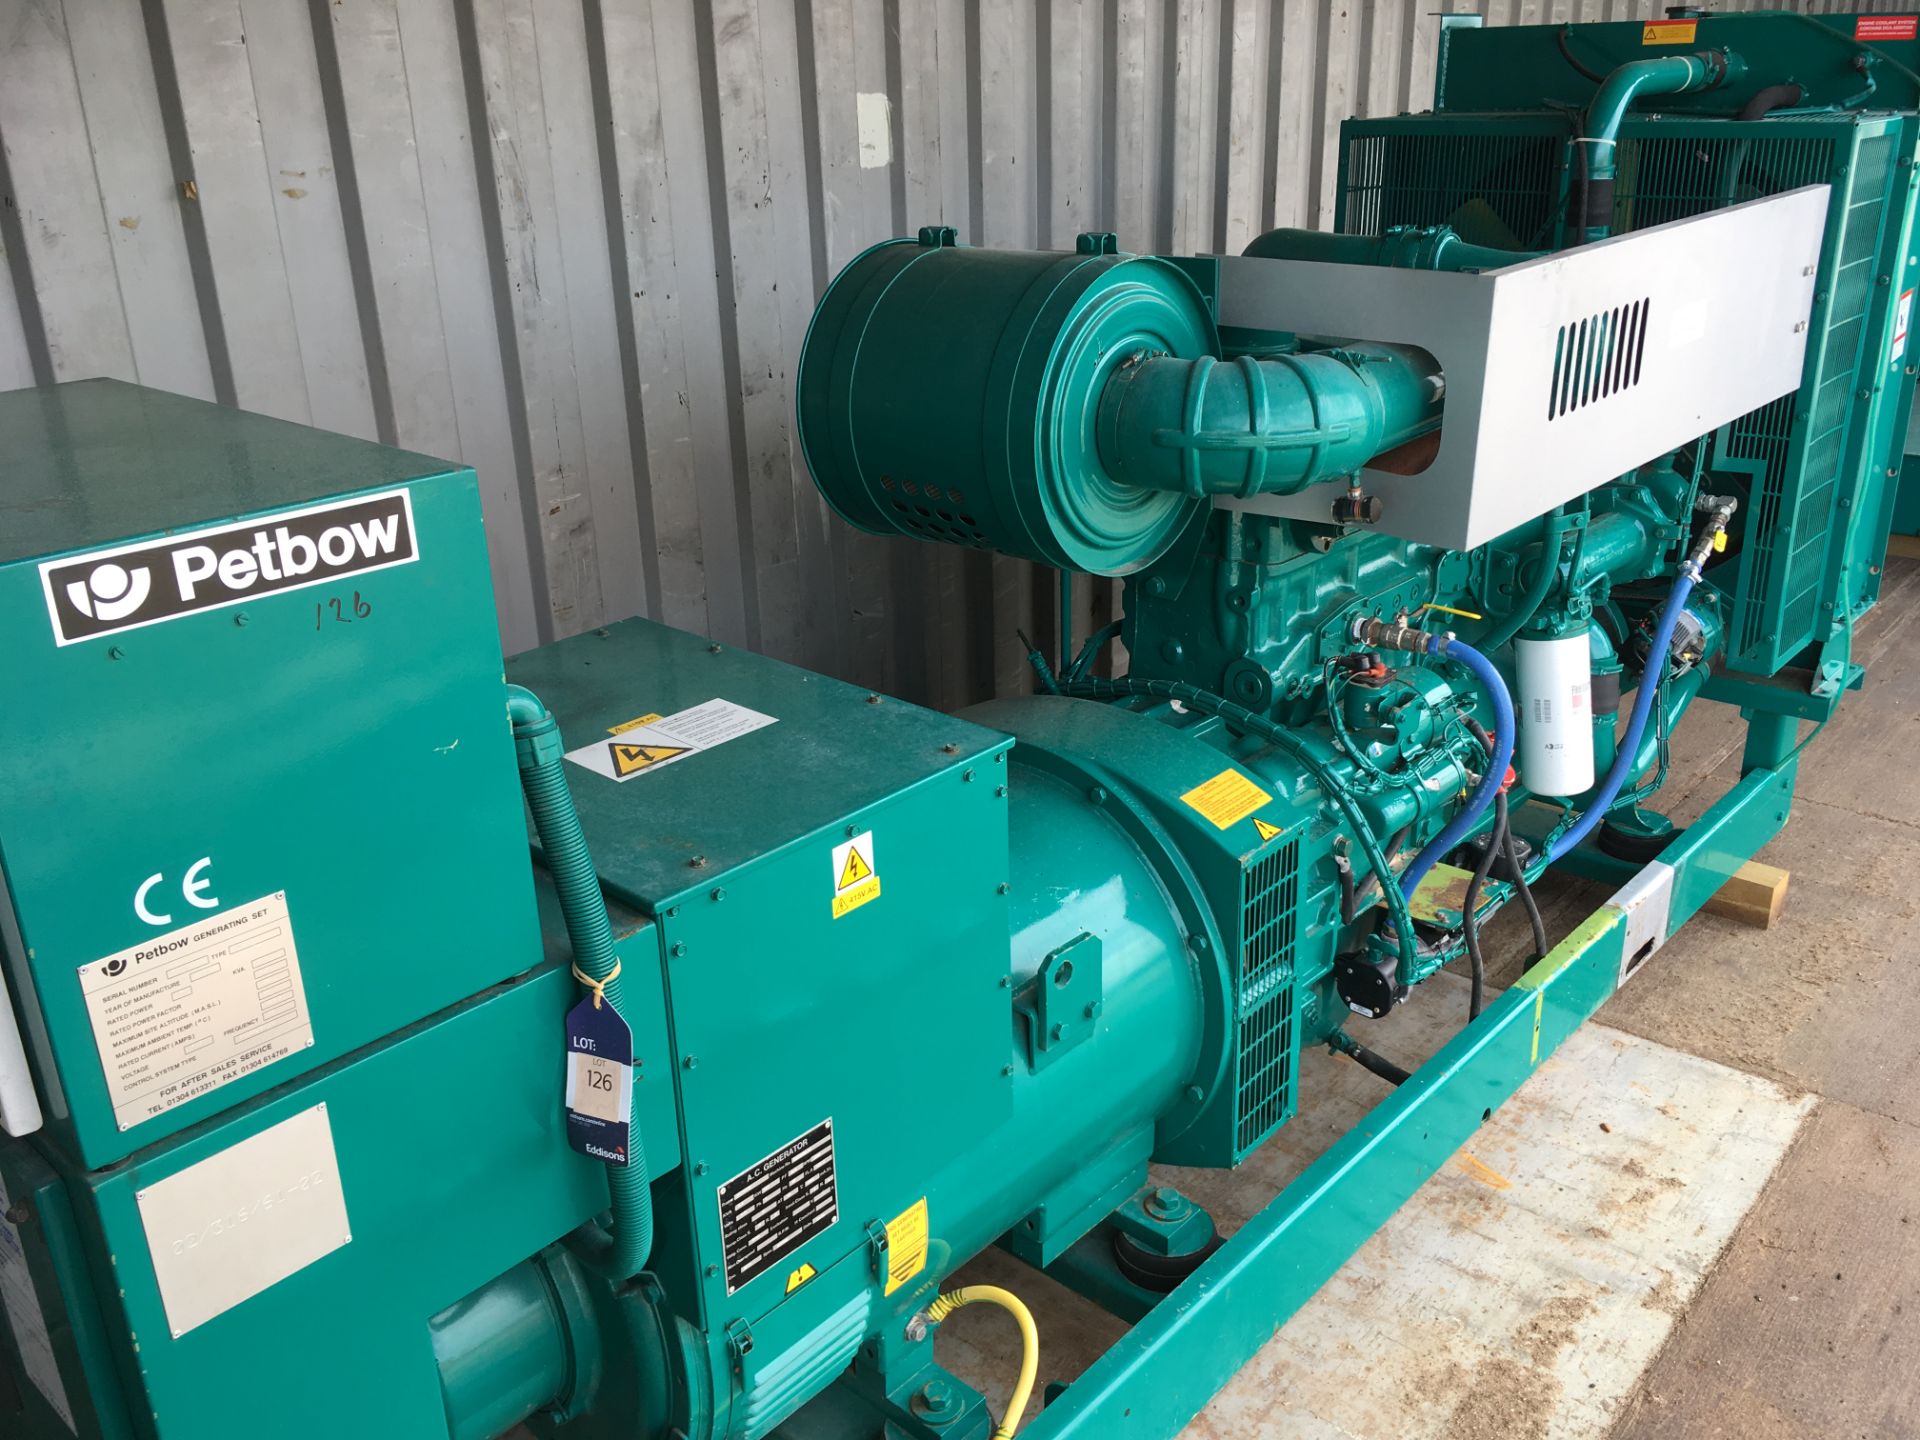 * Petbow 316KVA Standby Generator. A 1996 Petbow 316KVA Skid Mounted Diesel Generator with Cummins